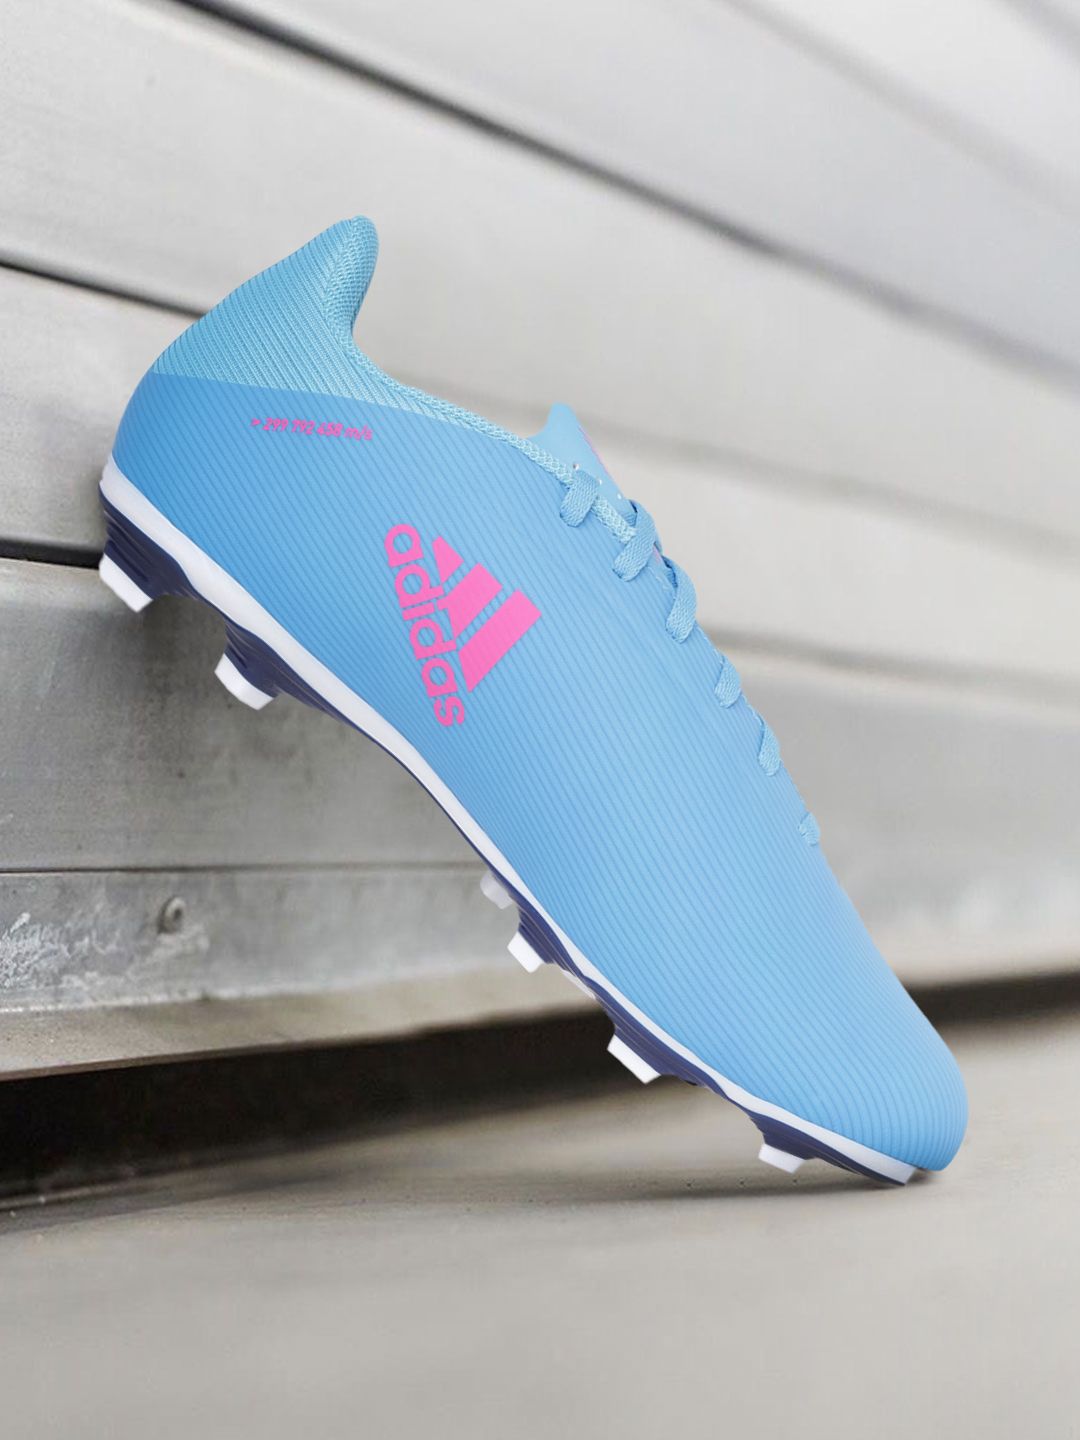 ADIDAS Unisex Blue & Pink Striped X Speedflow.4 FxG Sustainable Football Shoes Price in India